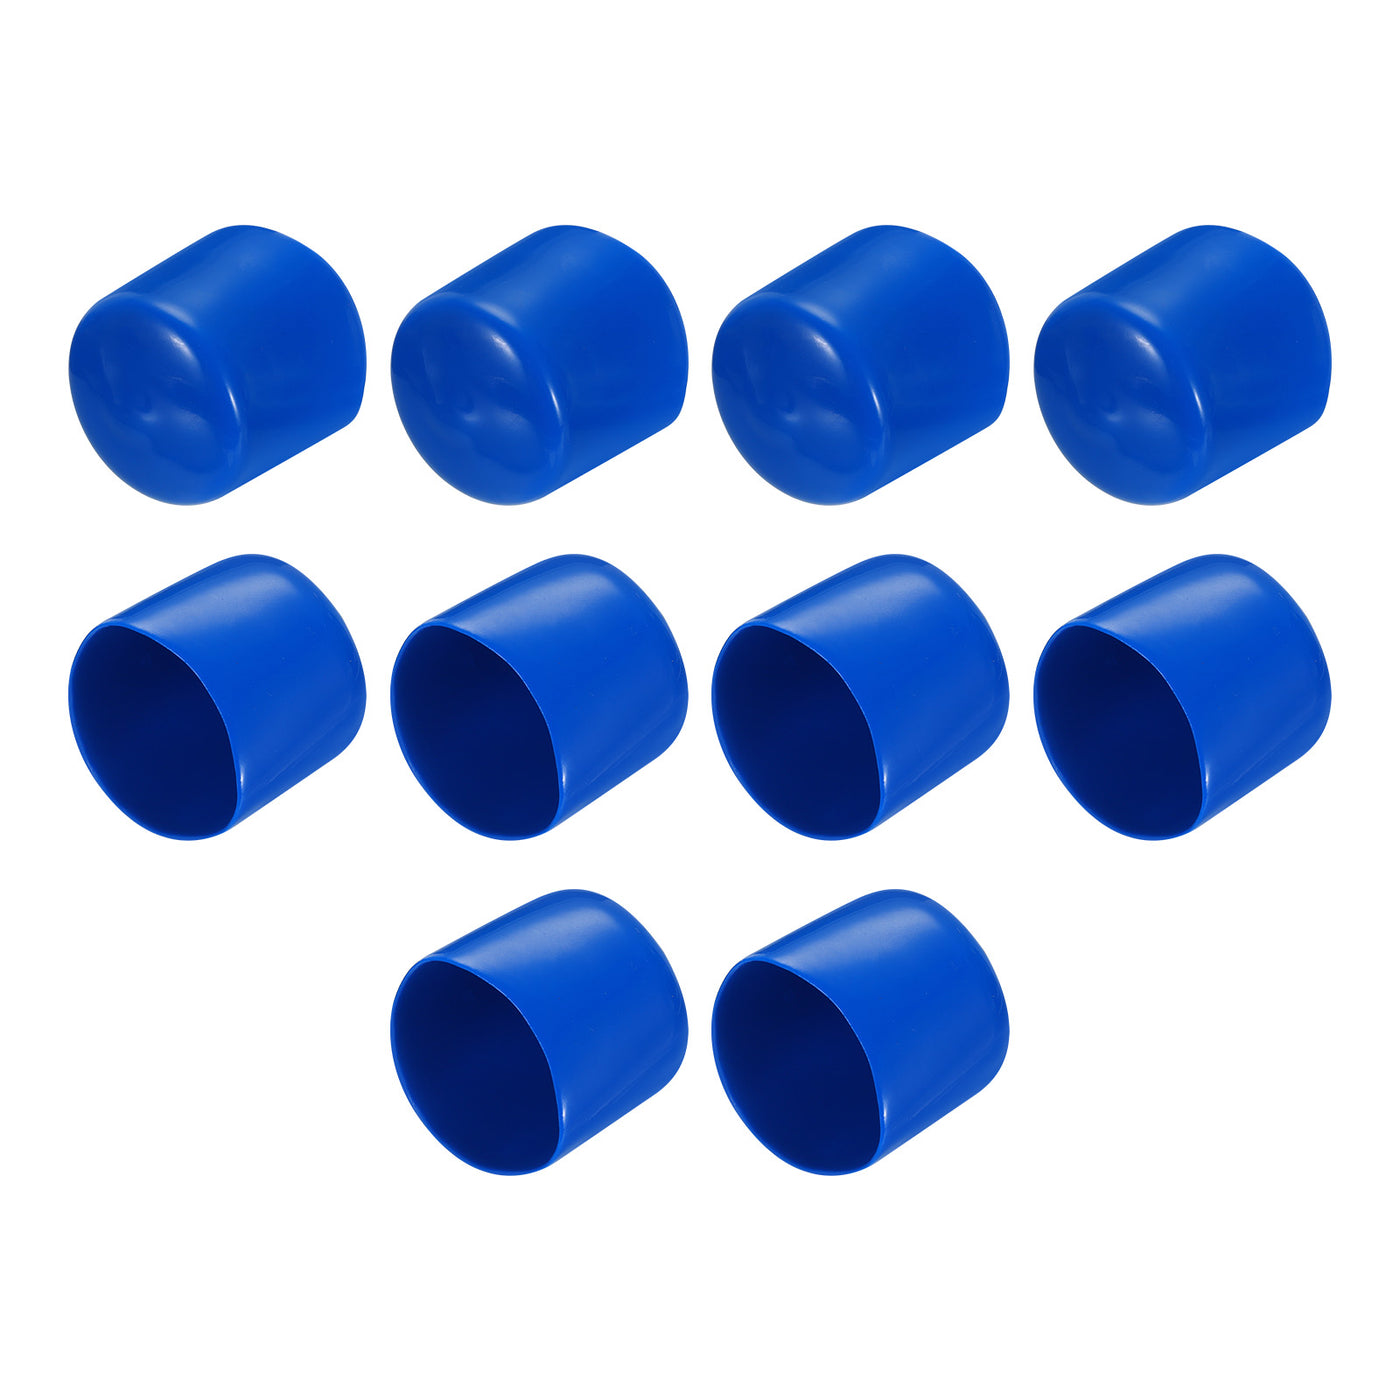 uxcell Uxcell 10pcs Rubber End Caps 36mm ID Vinyl Round End Cap Cover Screw Thread Protectors Blue